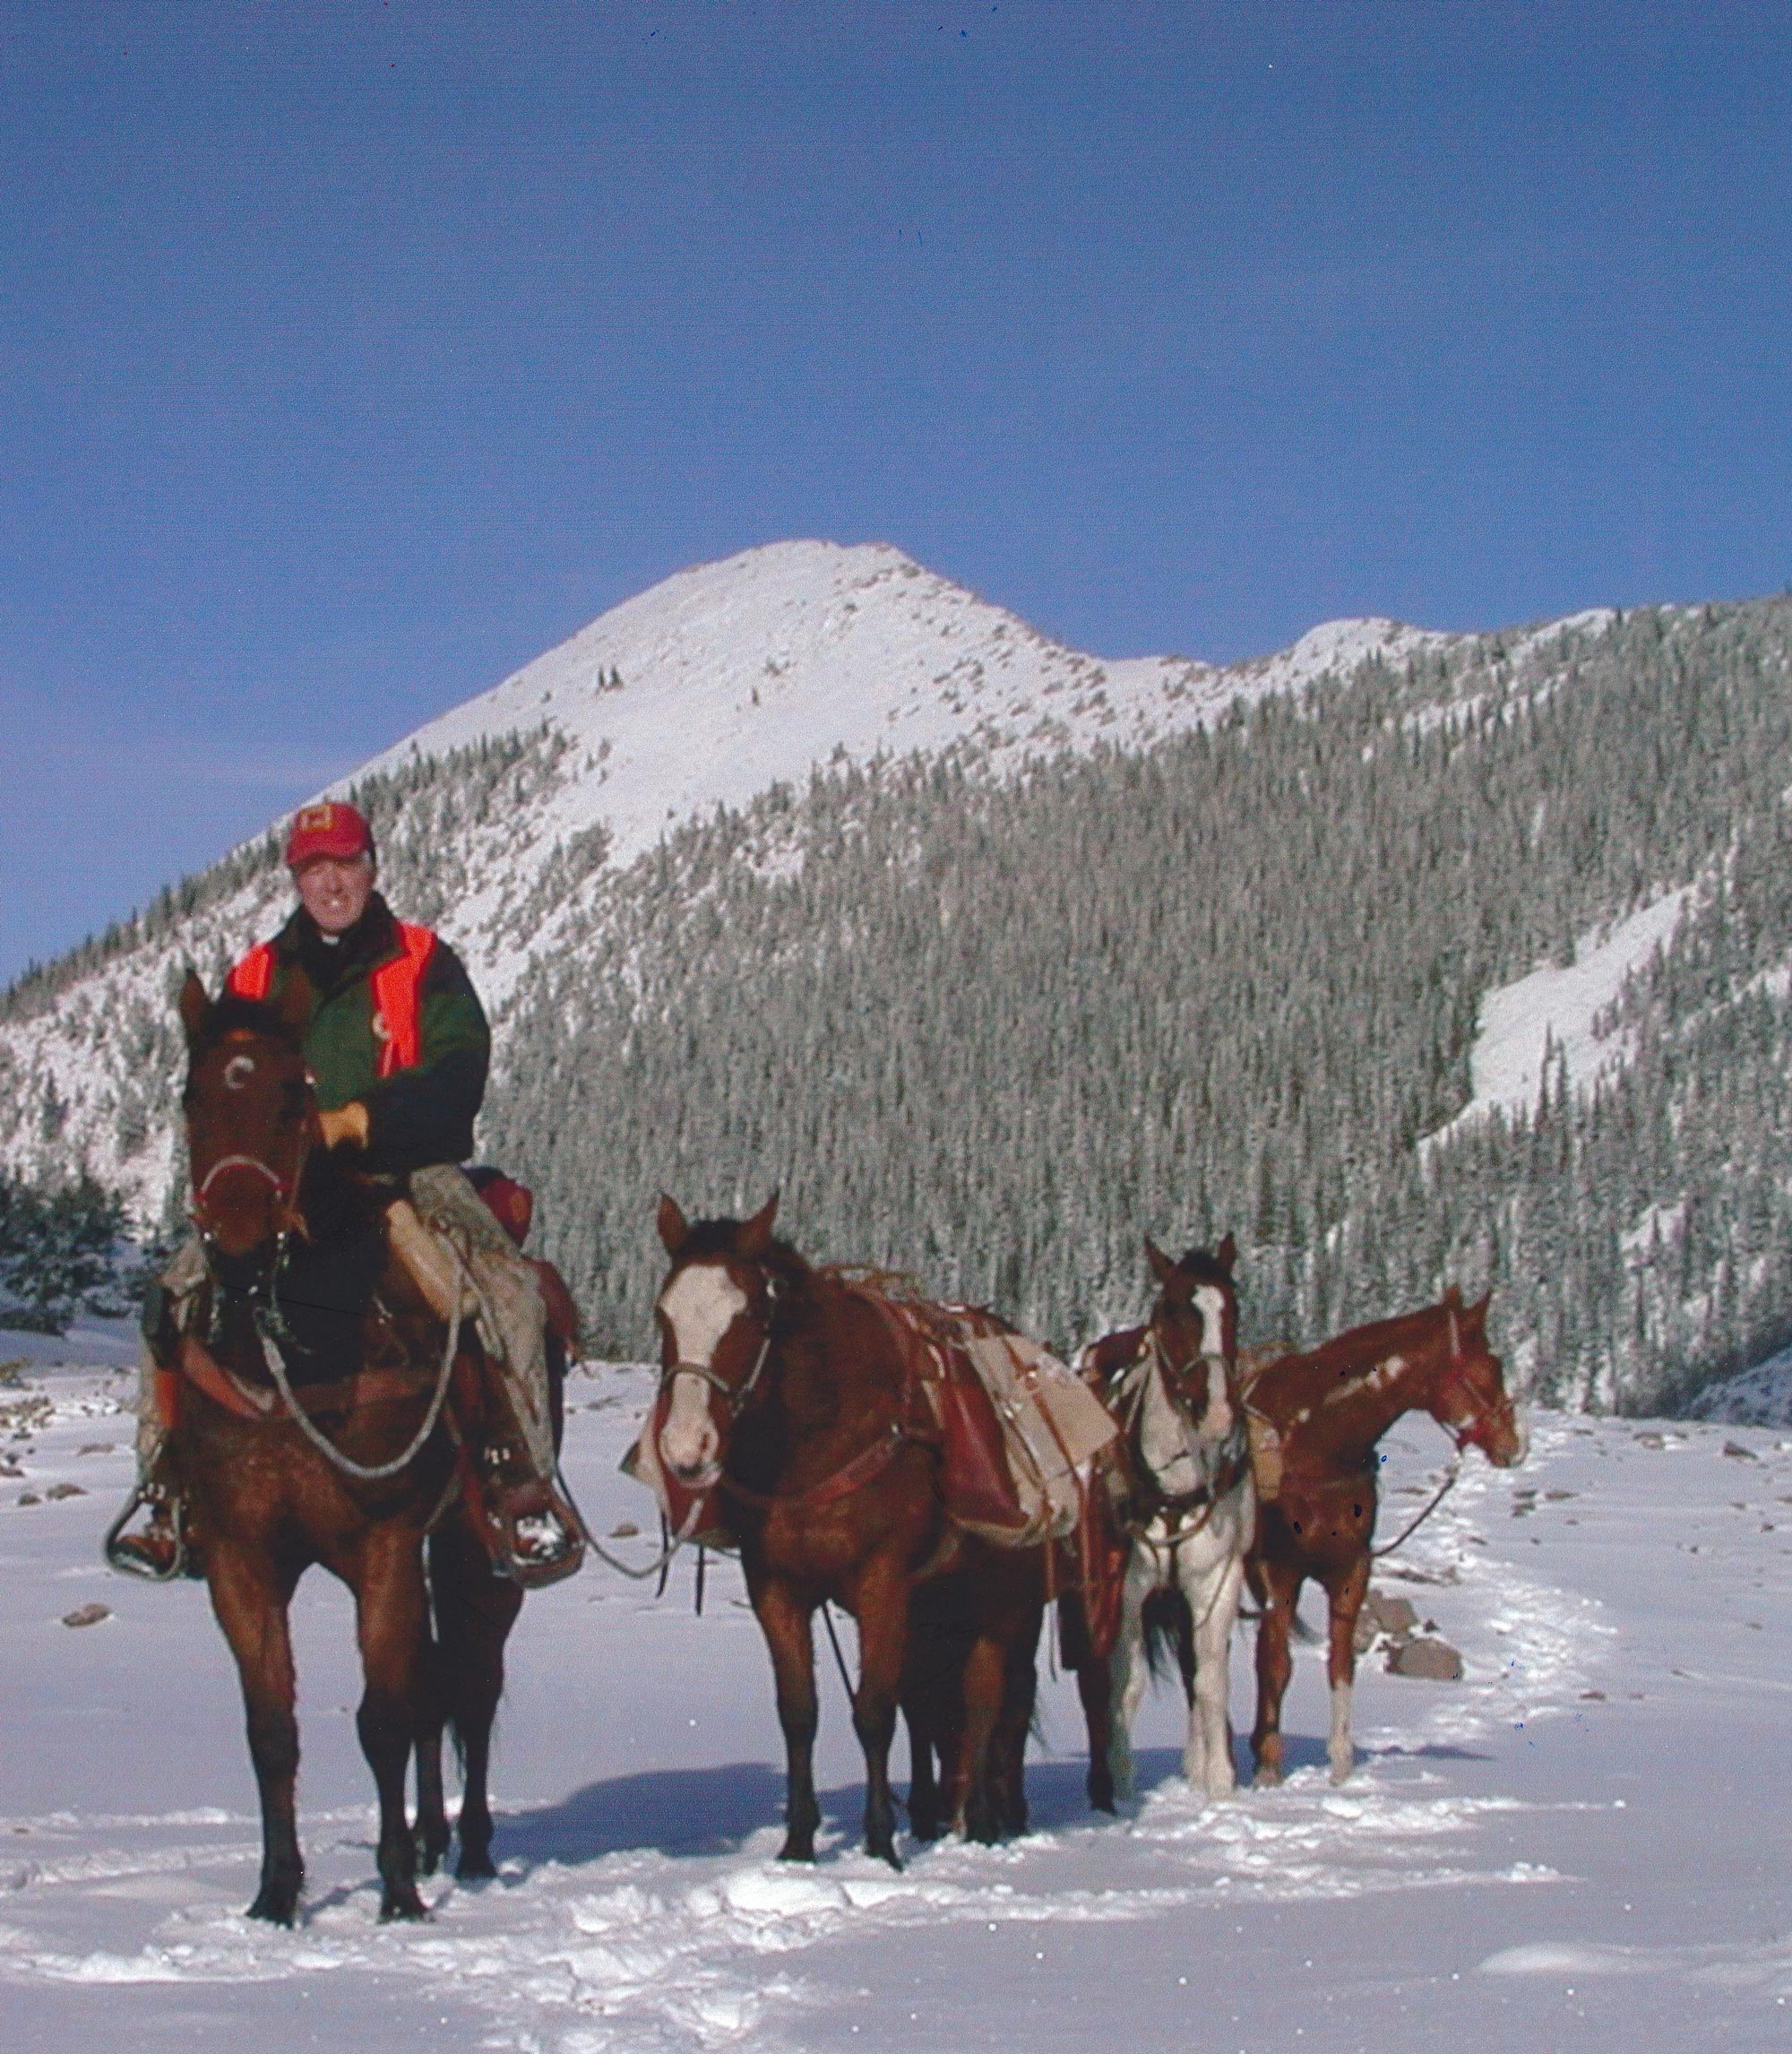 George Bettas with horses in the snow.